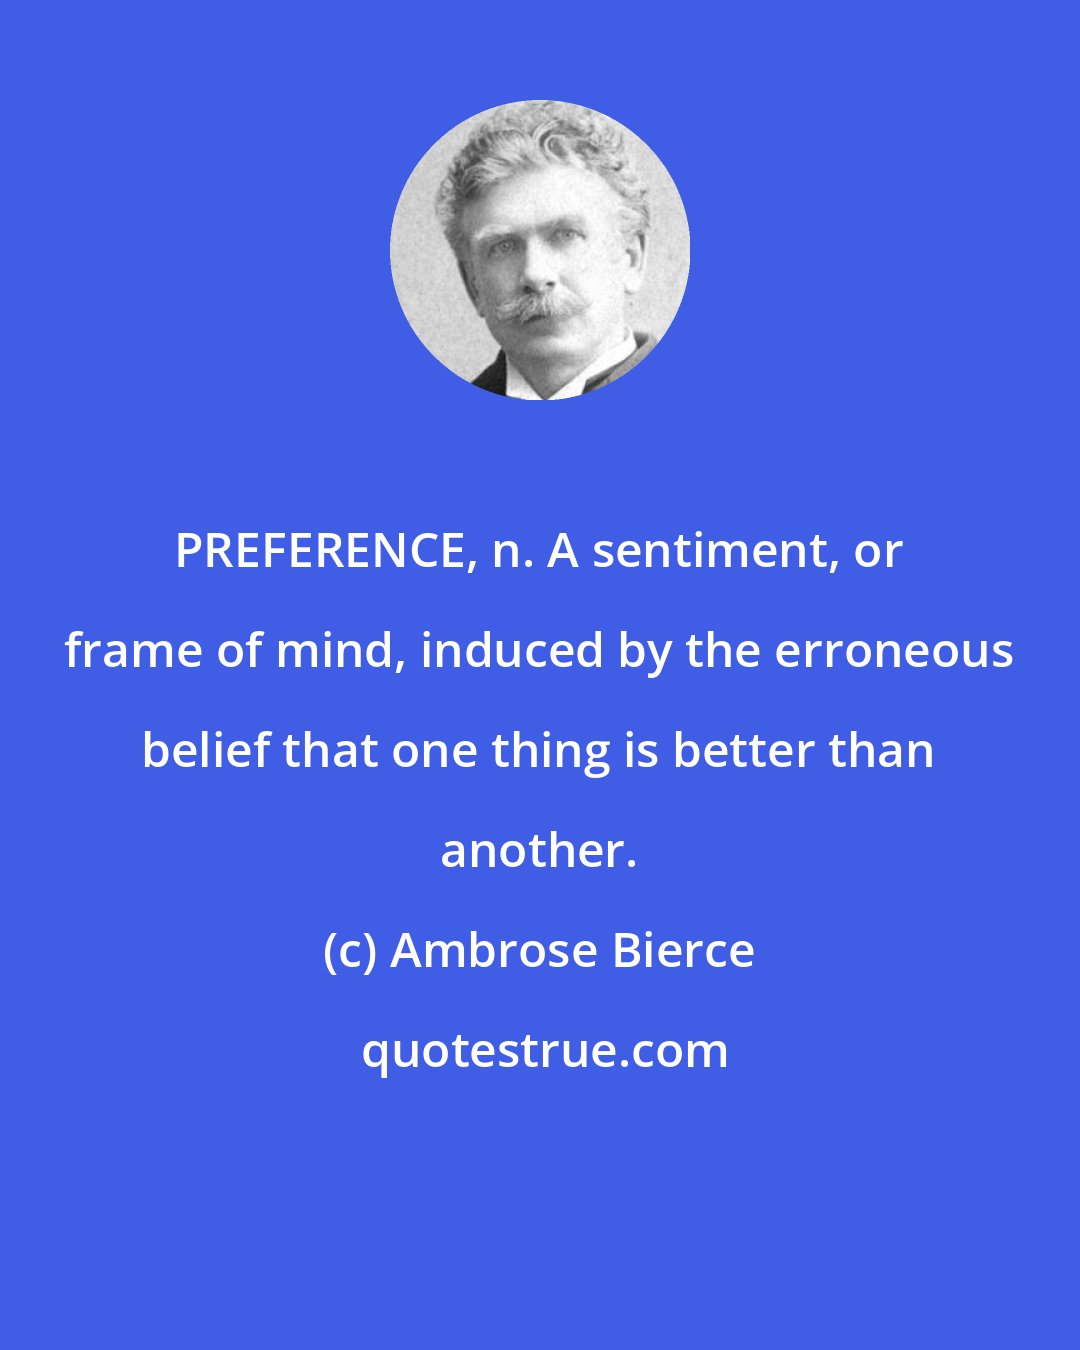 Ambrose Bierce: PREFERENCE, n. A sentiment, or frame of mind, induced by the erroneous belief that one thing is better than another.